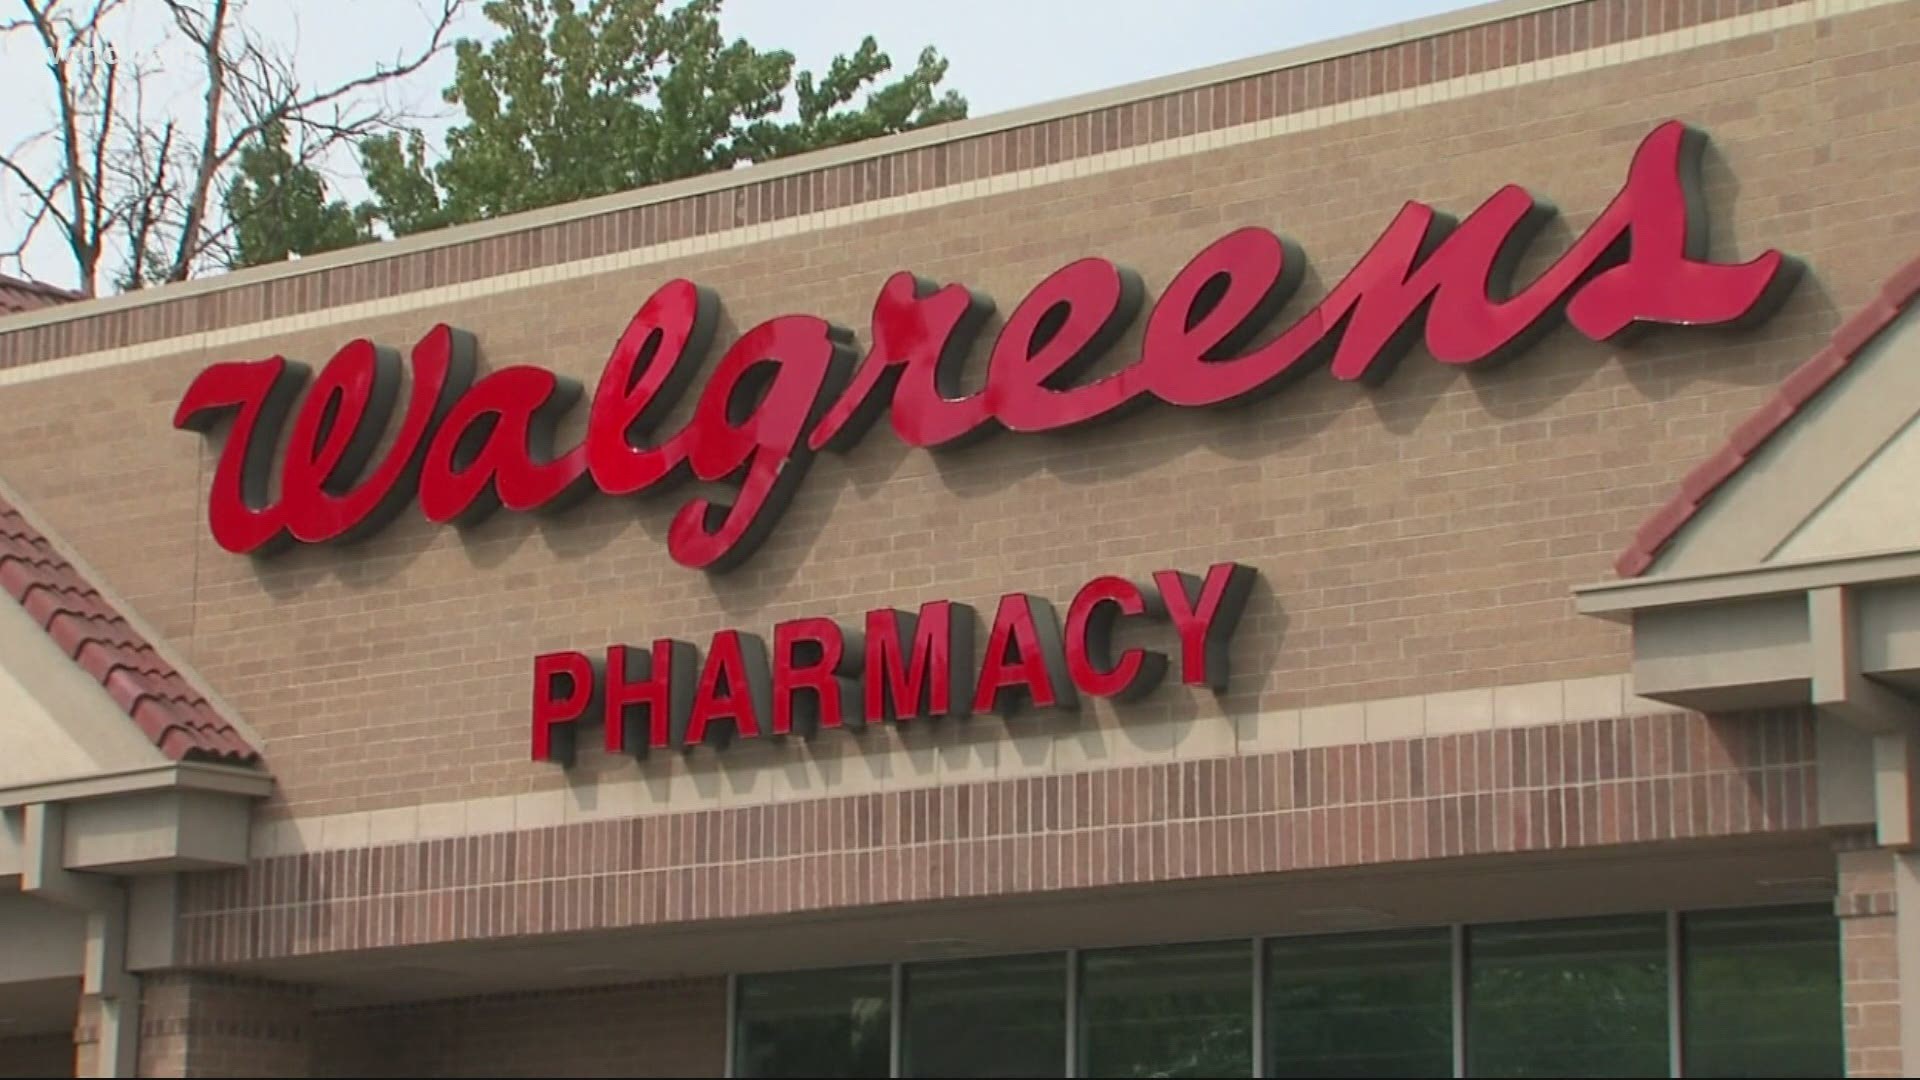 Walgreens had been scheduling customers' Pfizer doses 28 days apart instead of the CDC-recommended 21 days. Experts weigh in on the impacts on vaccine effectiveness.